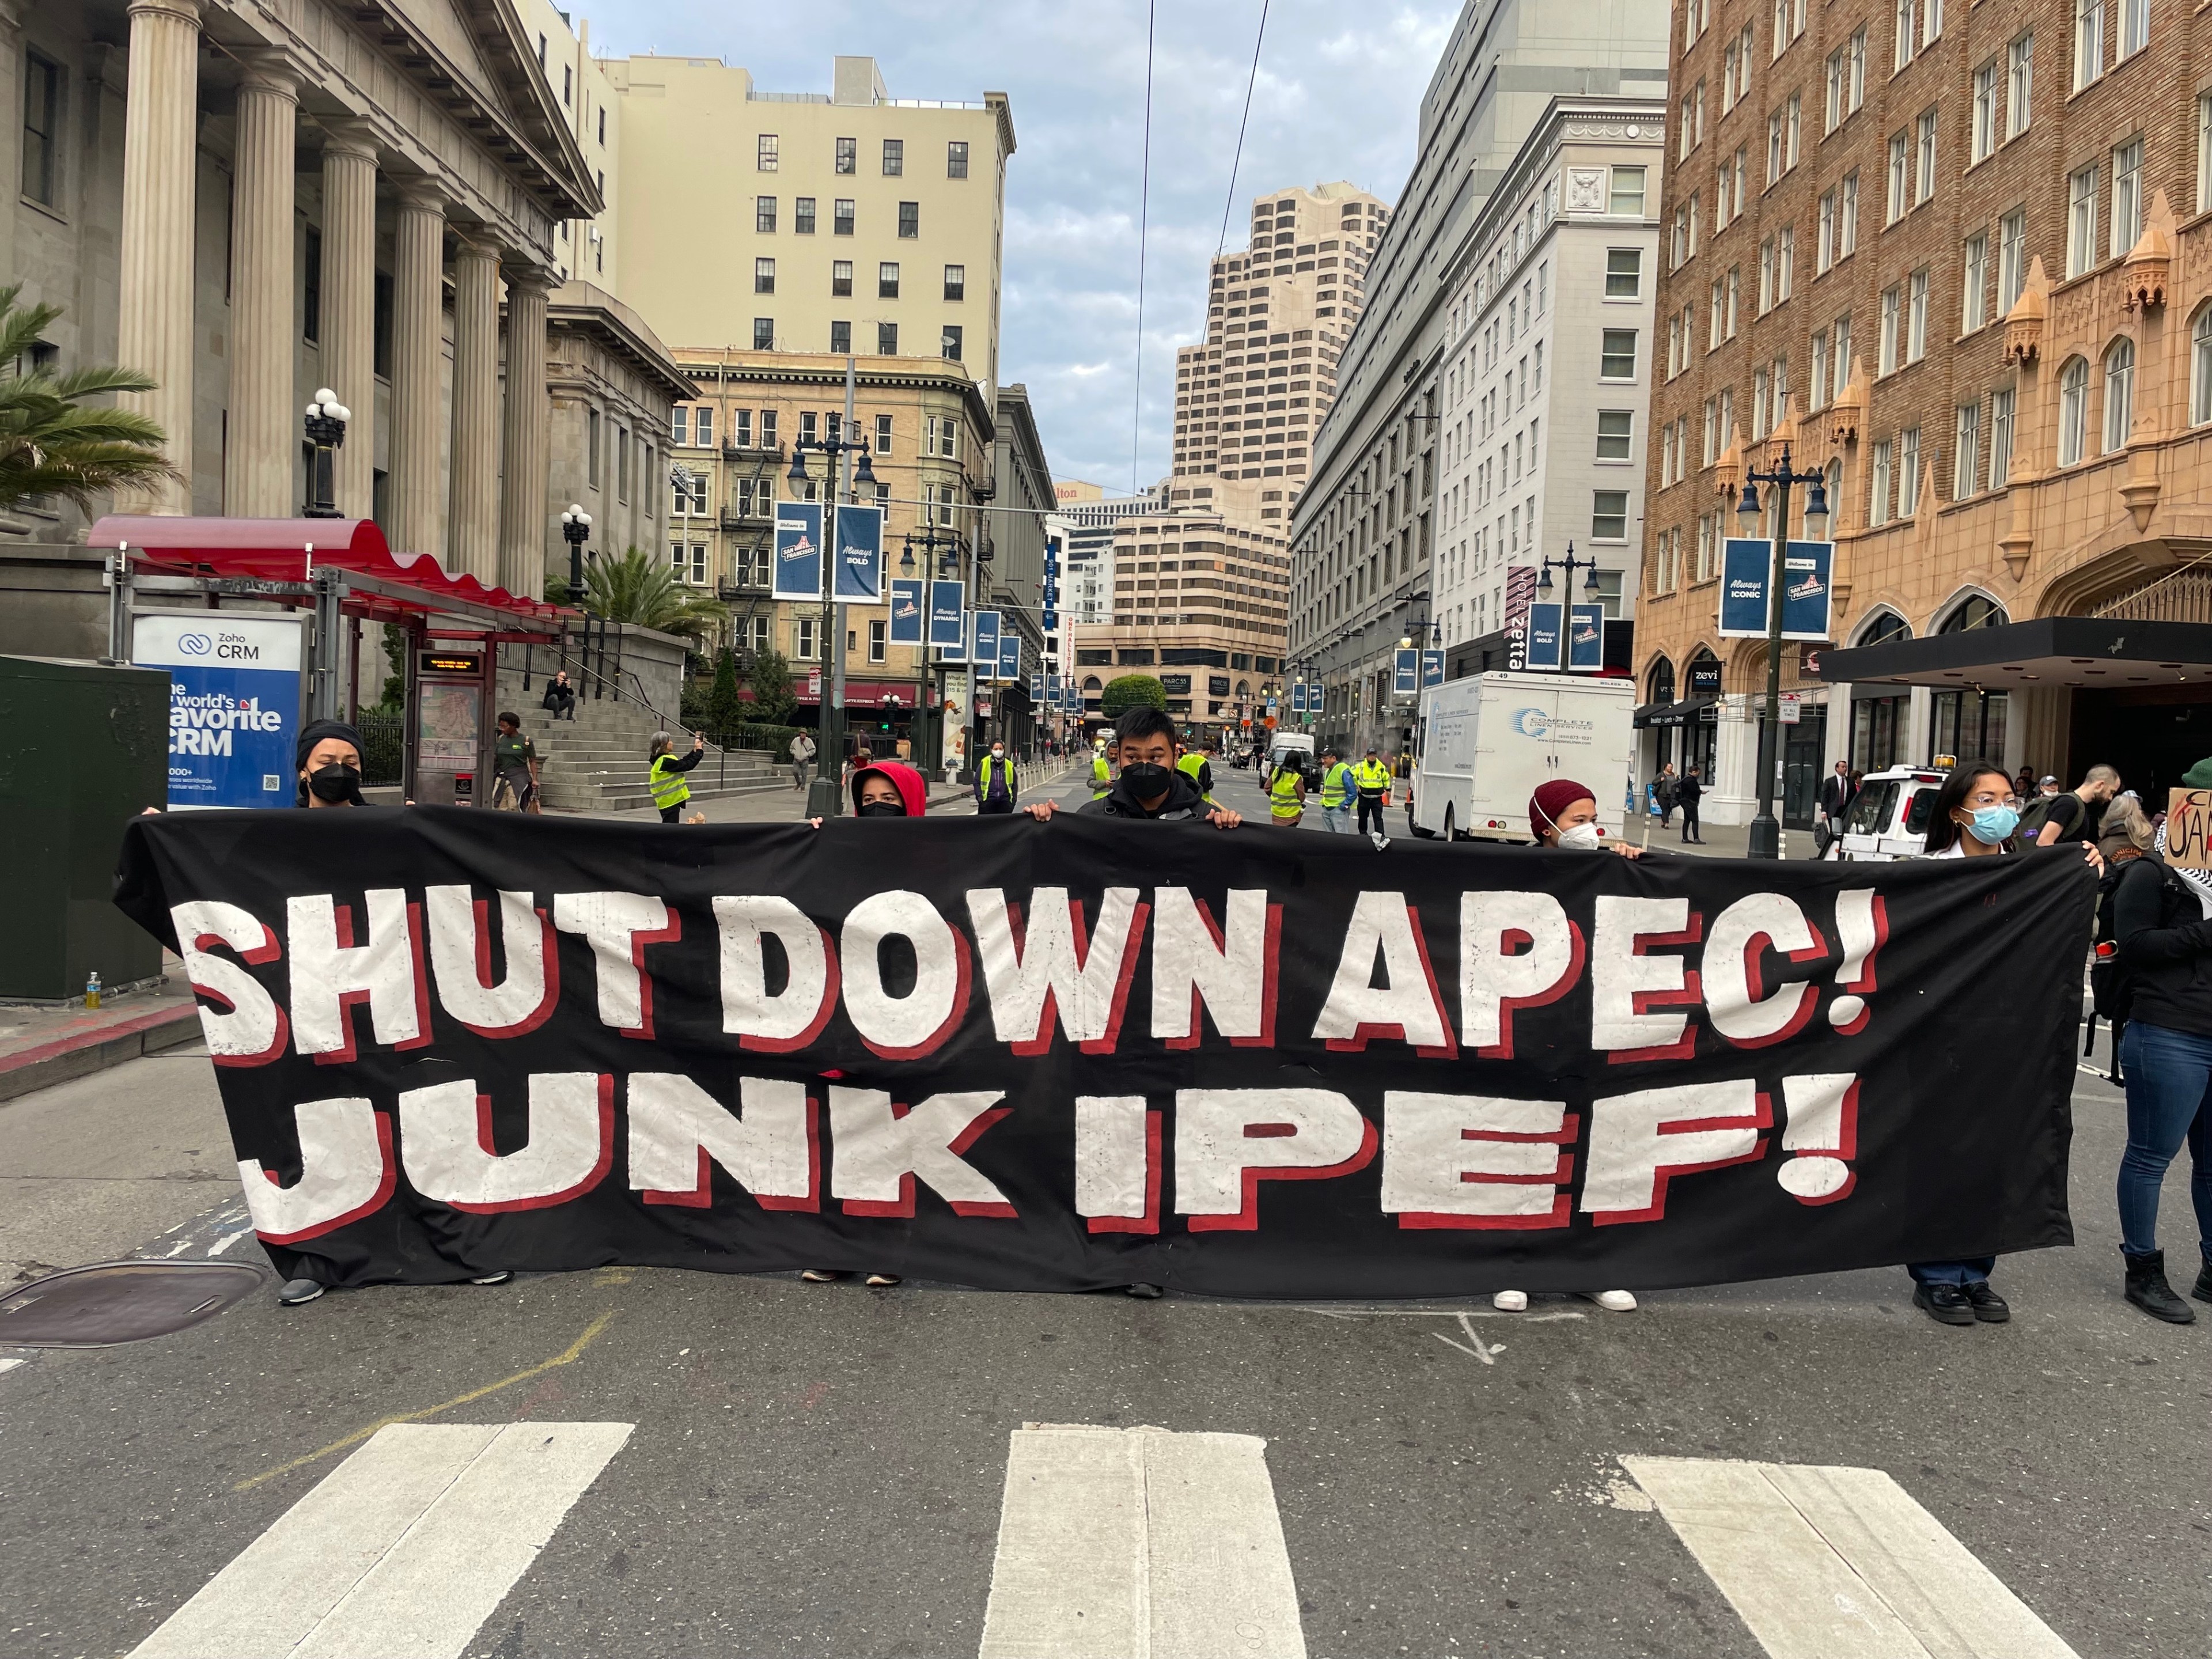 Several mask wearing protesters hold a dark colored banner with the words &quot;Shut down APEC! Junk IPEF&quot; across it in white block lettering while standing in a street blocked off to traffic.